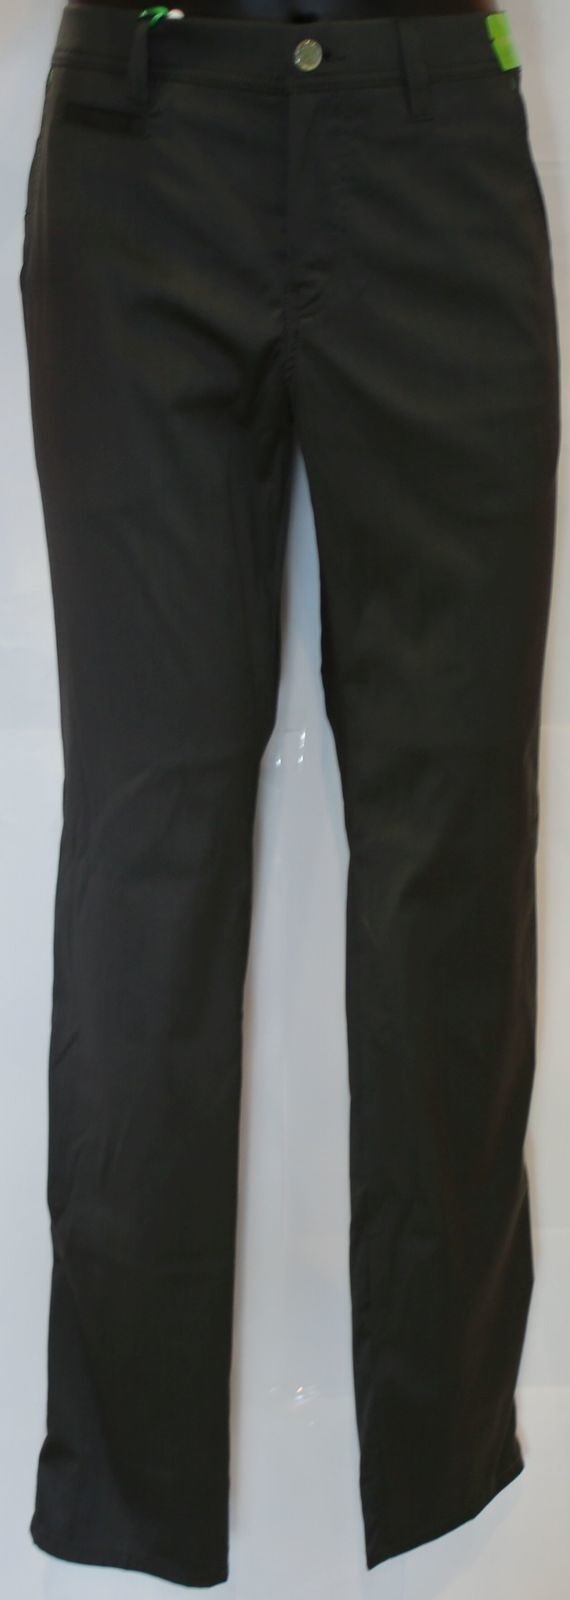 Pantalons Alberto Rookie 3xDRY Cooler Mens Trousers Charcoal 56